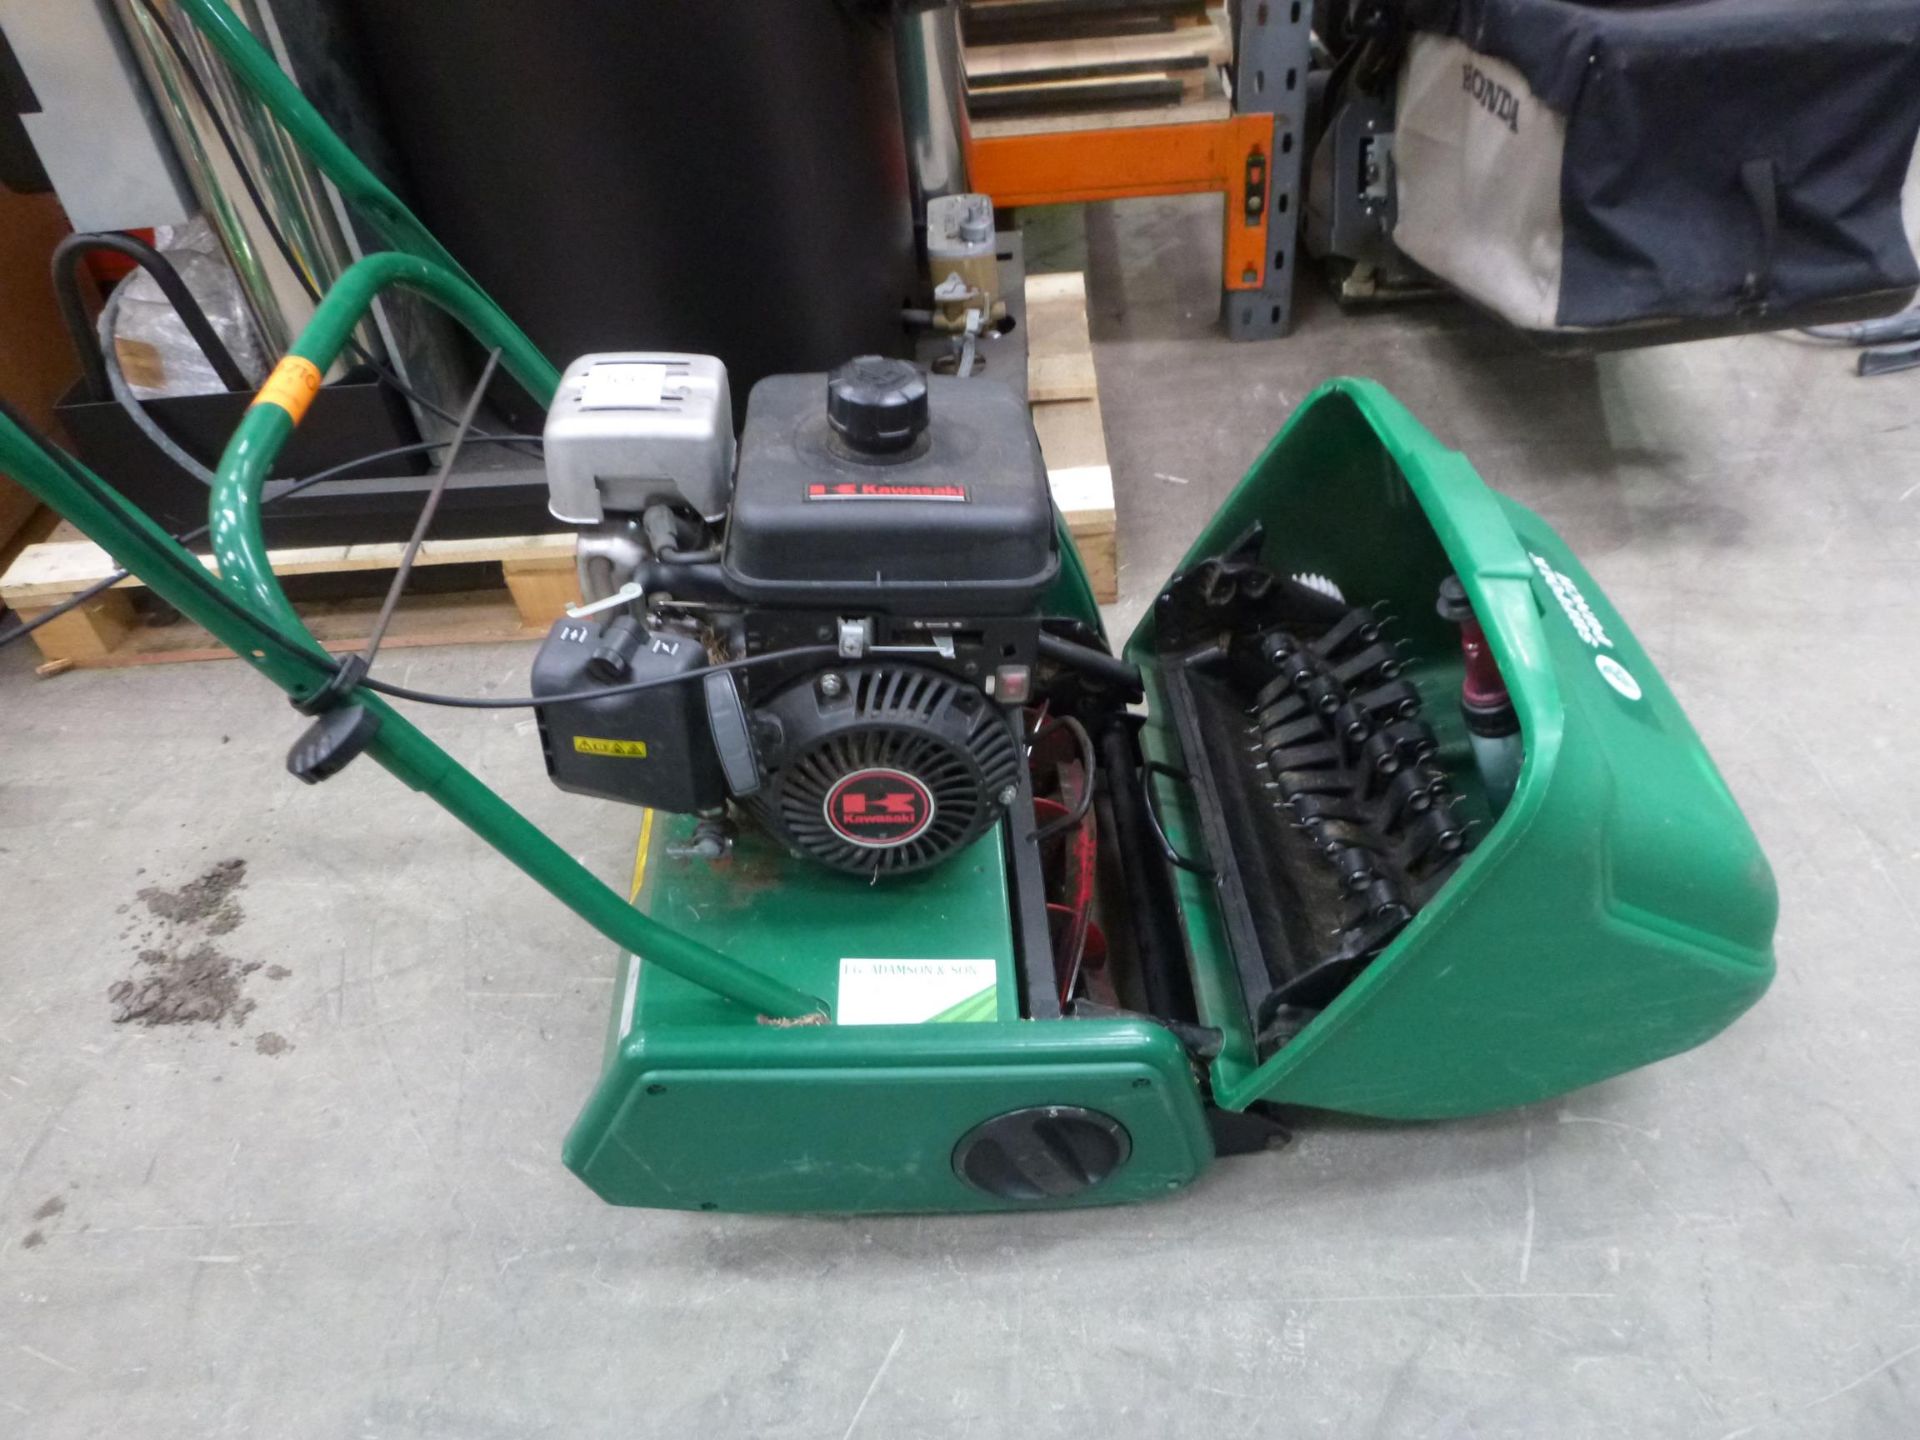 A Sufolk Punch Petro Cylinder 14SK Mower with Kawasaki Engine. - Image 2 of 3